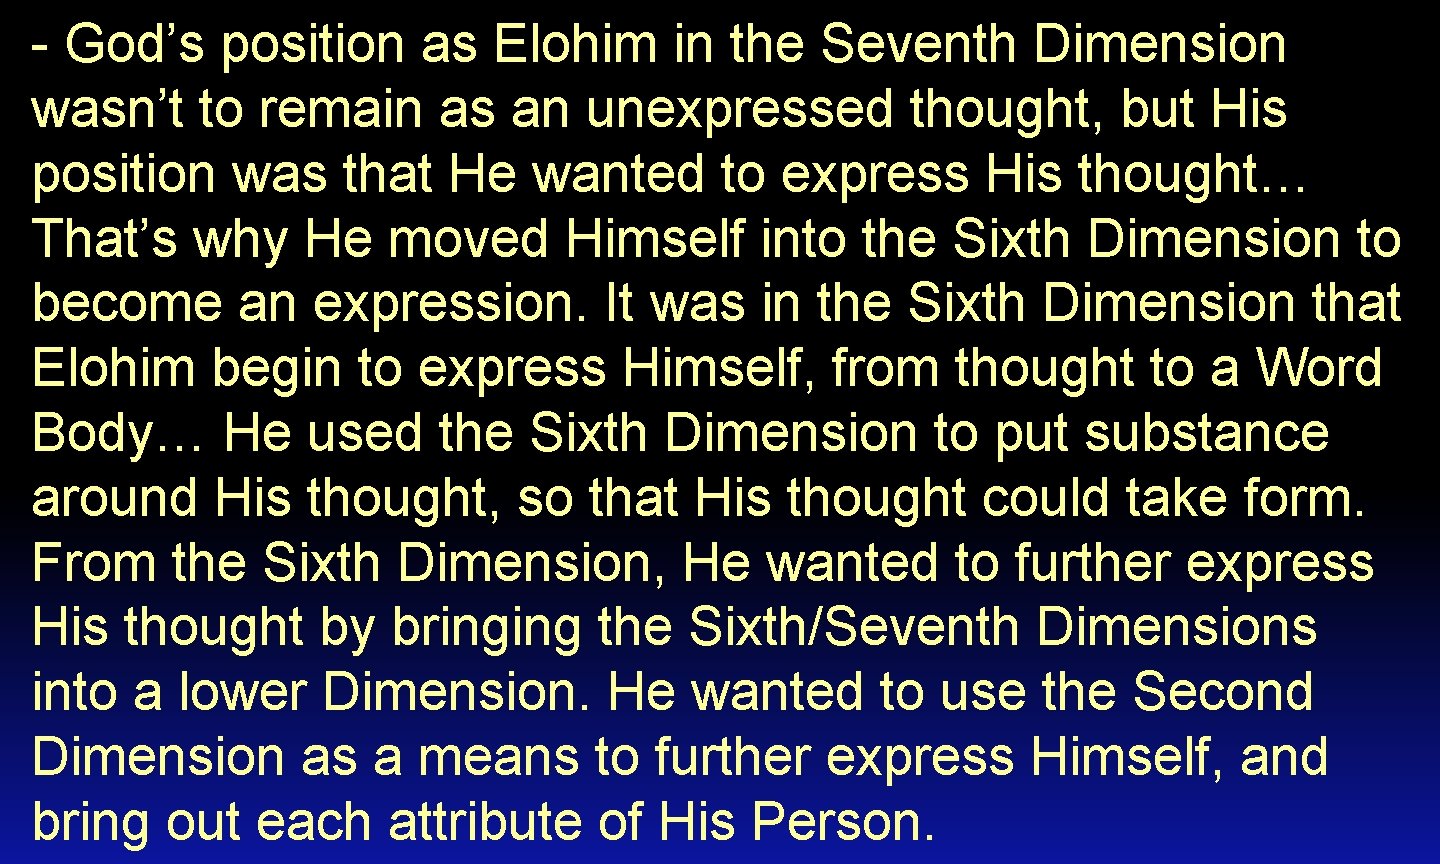 - God’s position as Elohim in the Seventh Dimension wasn’t to remain as an